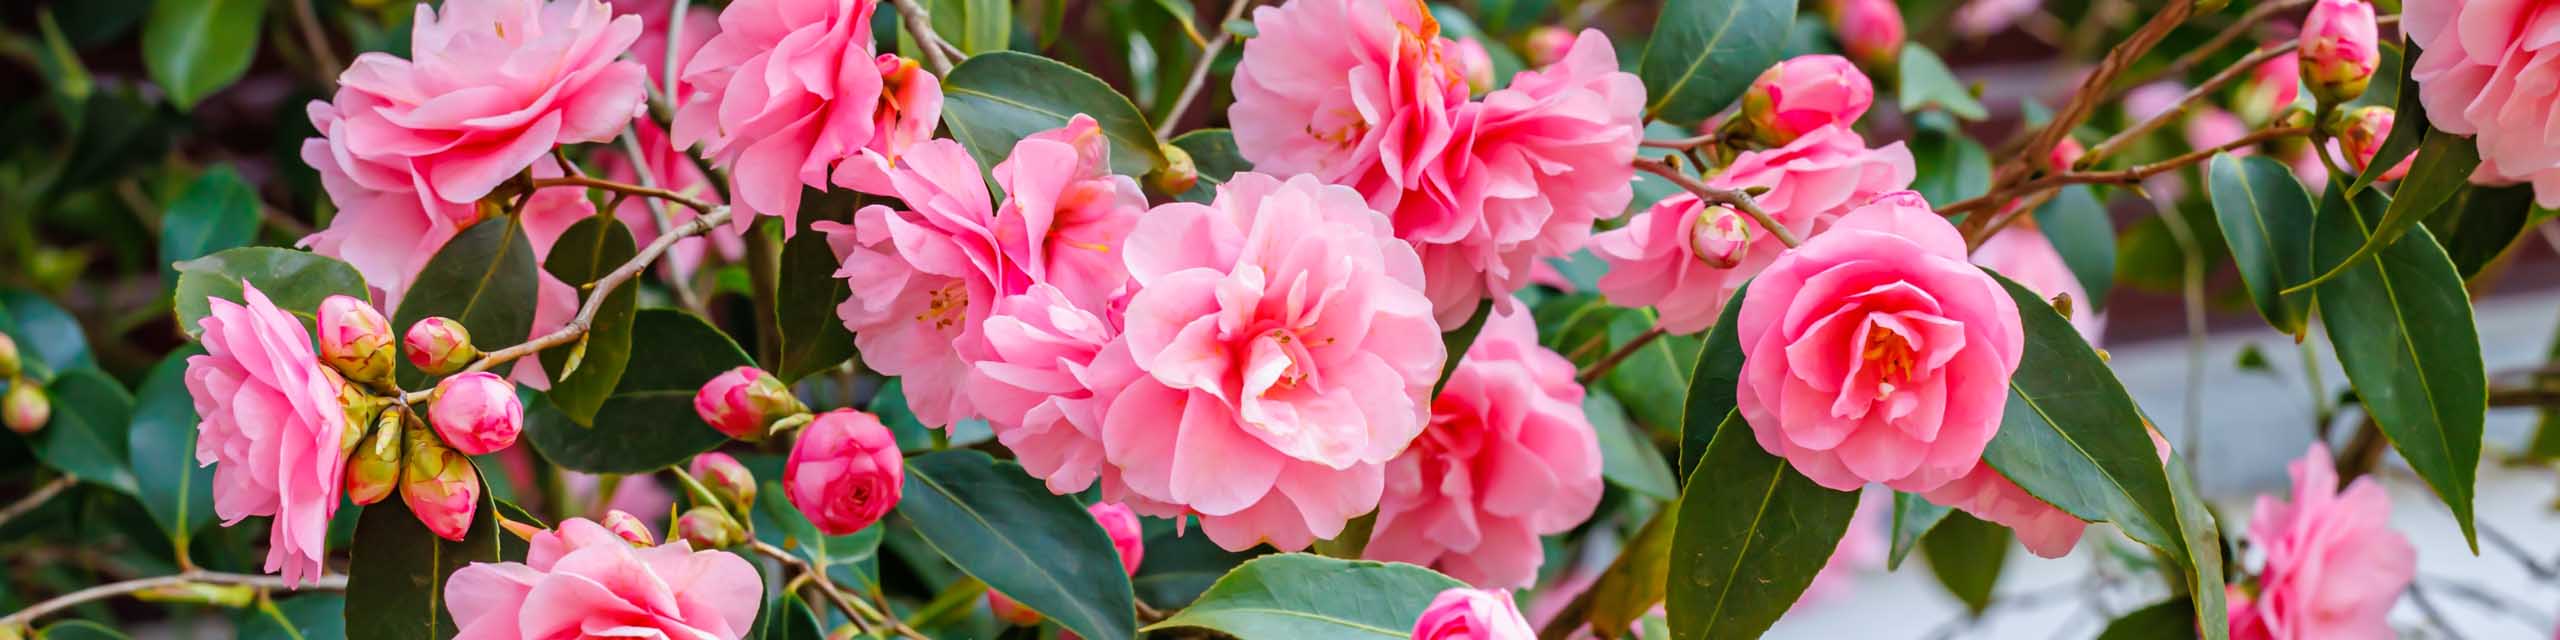 Pink camellia japonica flowers.